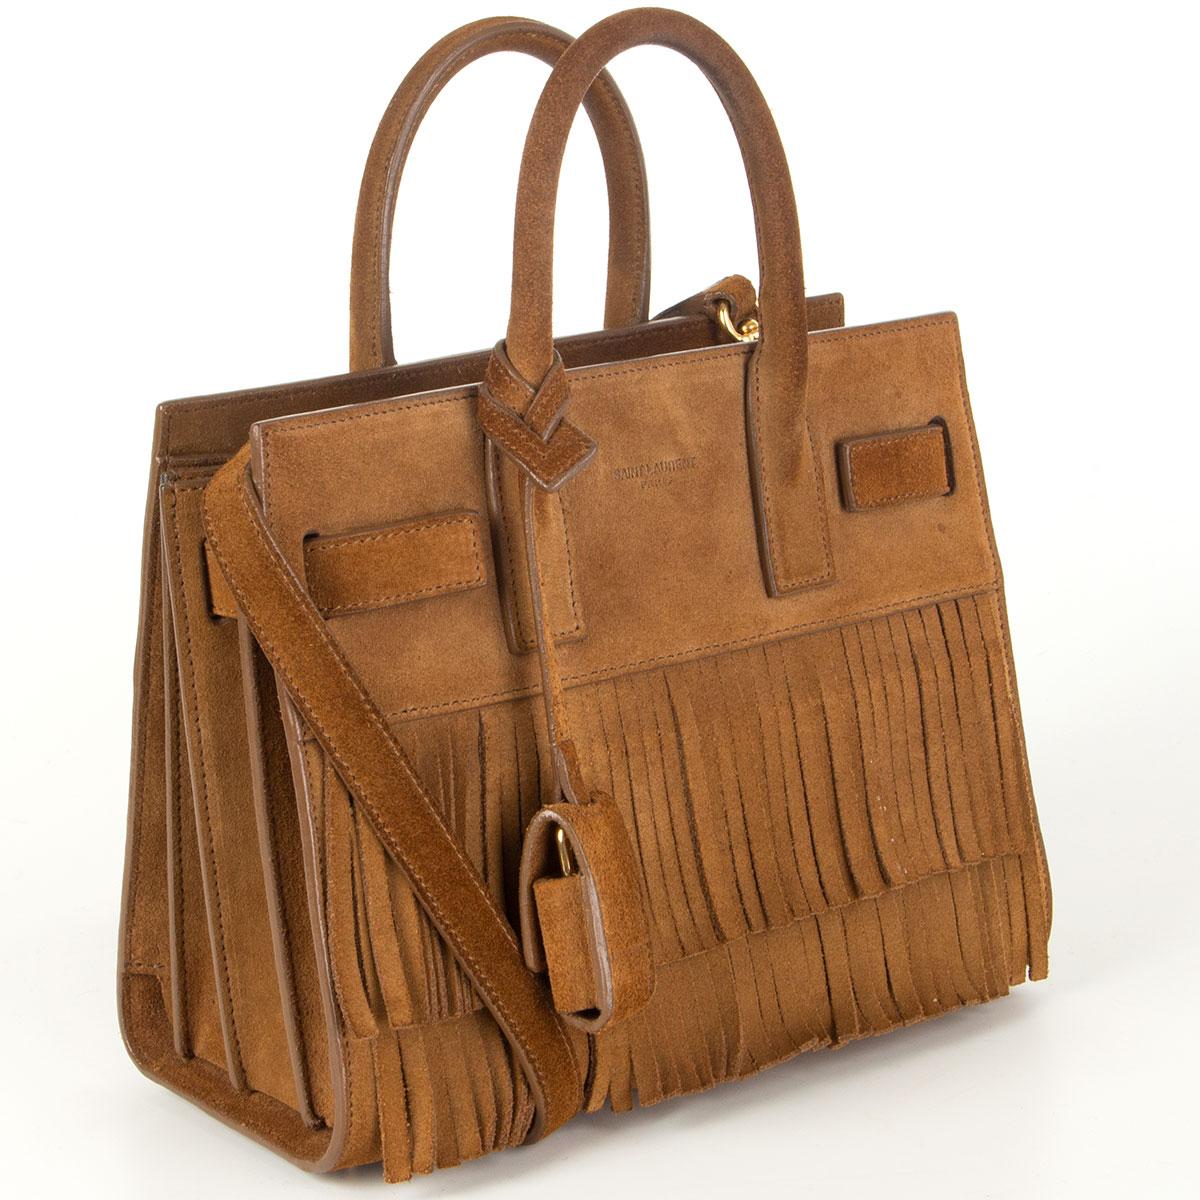 Saint Laurent Sac De Jour Nano Fringe shoulder bag in toffee brown suede. Lined in black calfskin with one open pocket against the back. Comes with a detachable and adjustable shoulder strap, lock and keys. Has been carried with some some soft marks